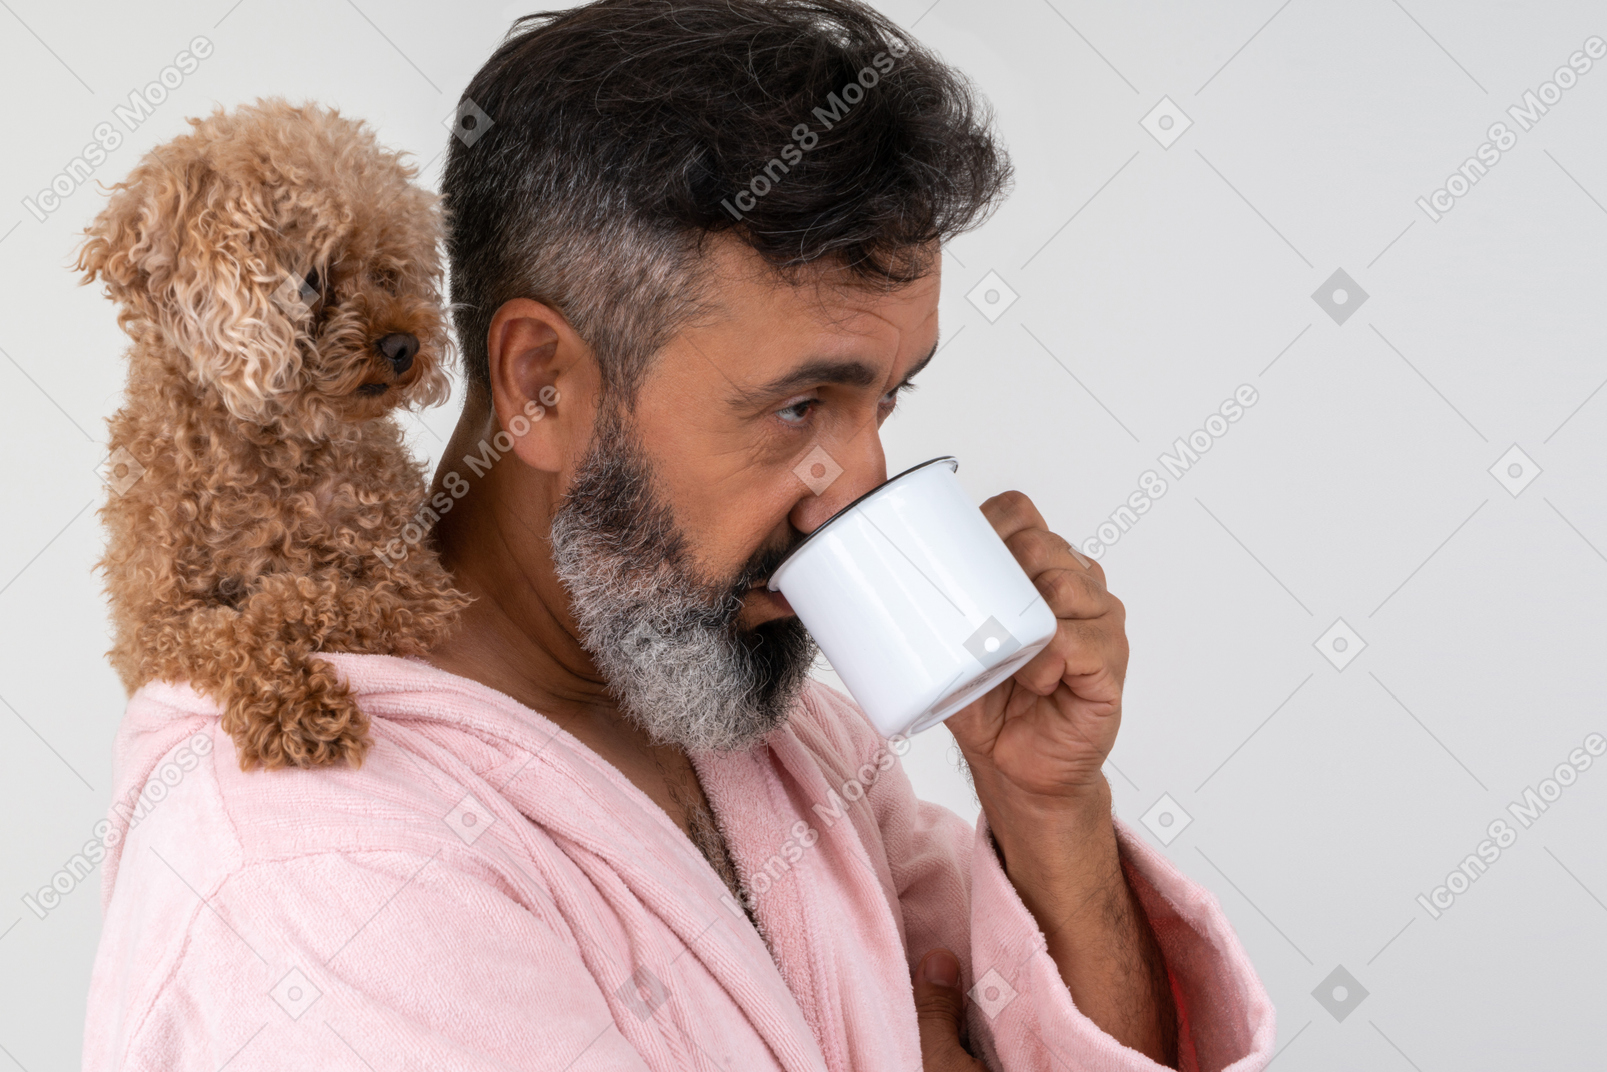 Mature man drinking a coffee with a puppy on his shoulder